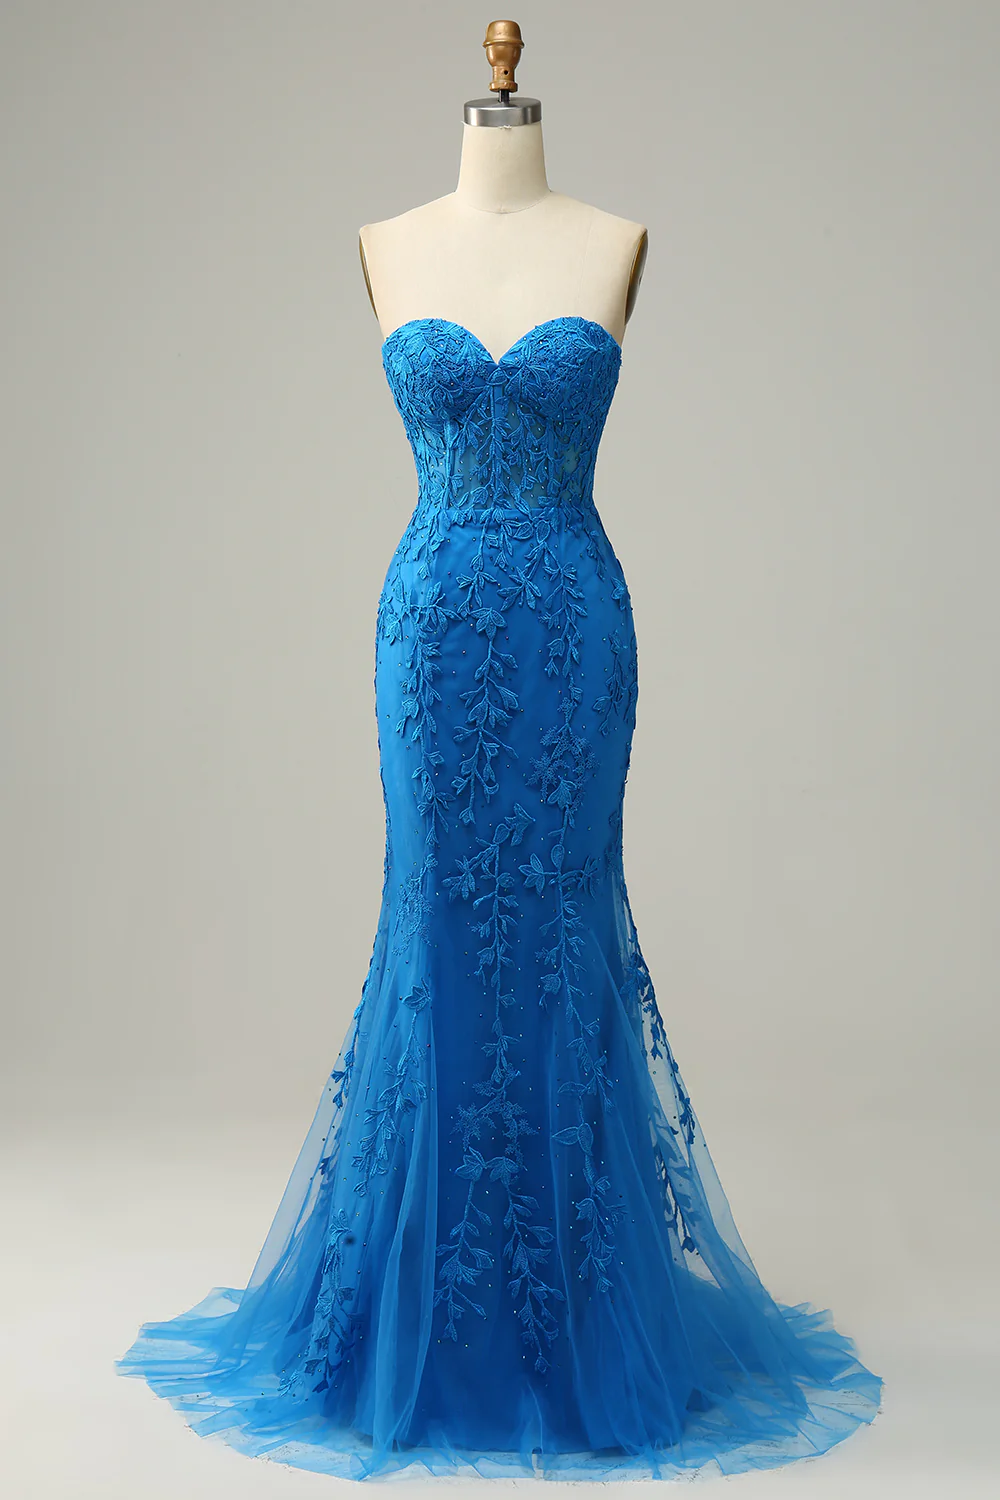 Mermaid Sweetheart Royal Blue Long Prom Dress with Criss Cross Back Y4287